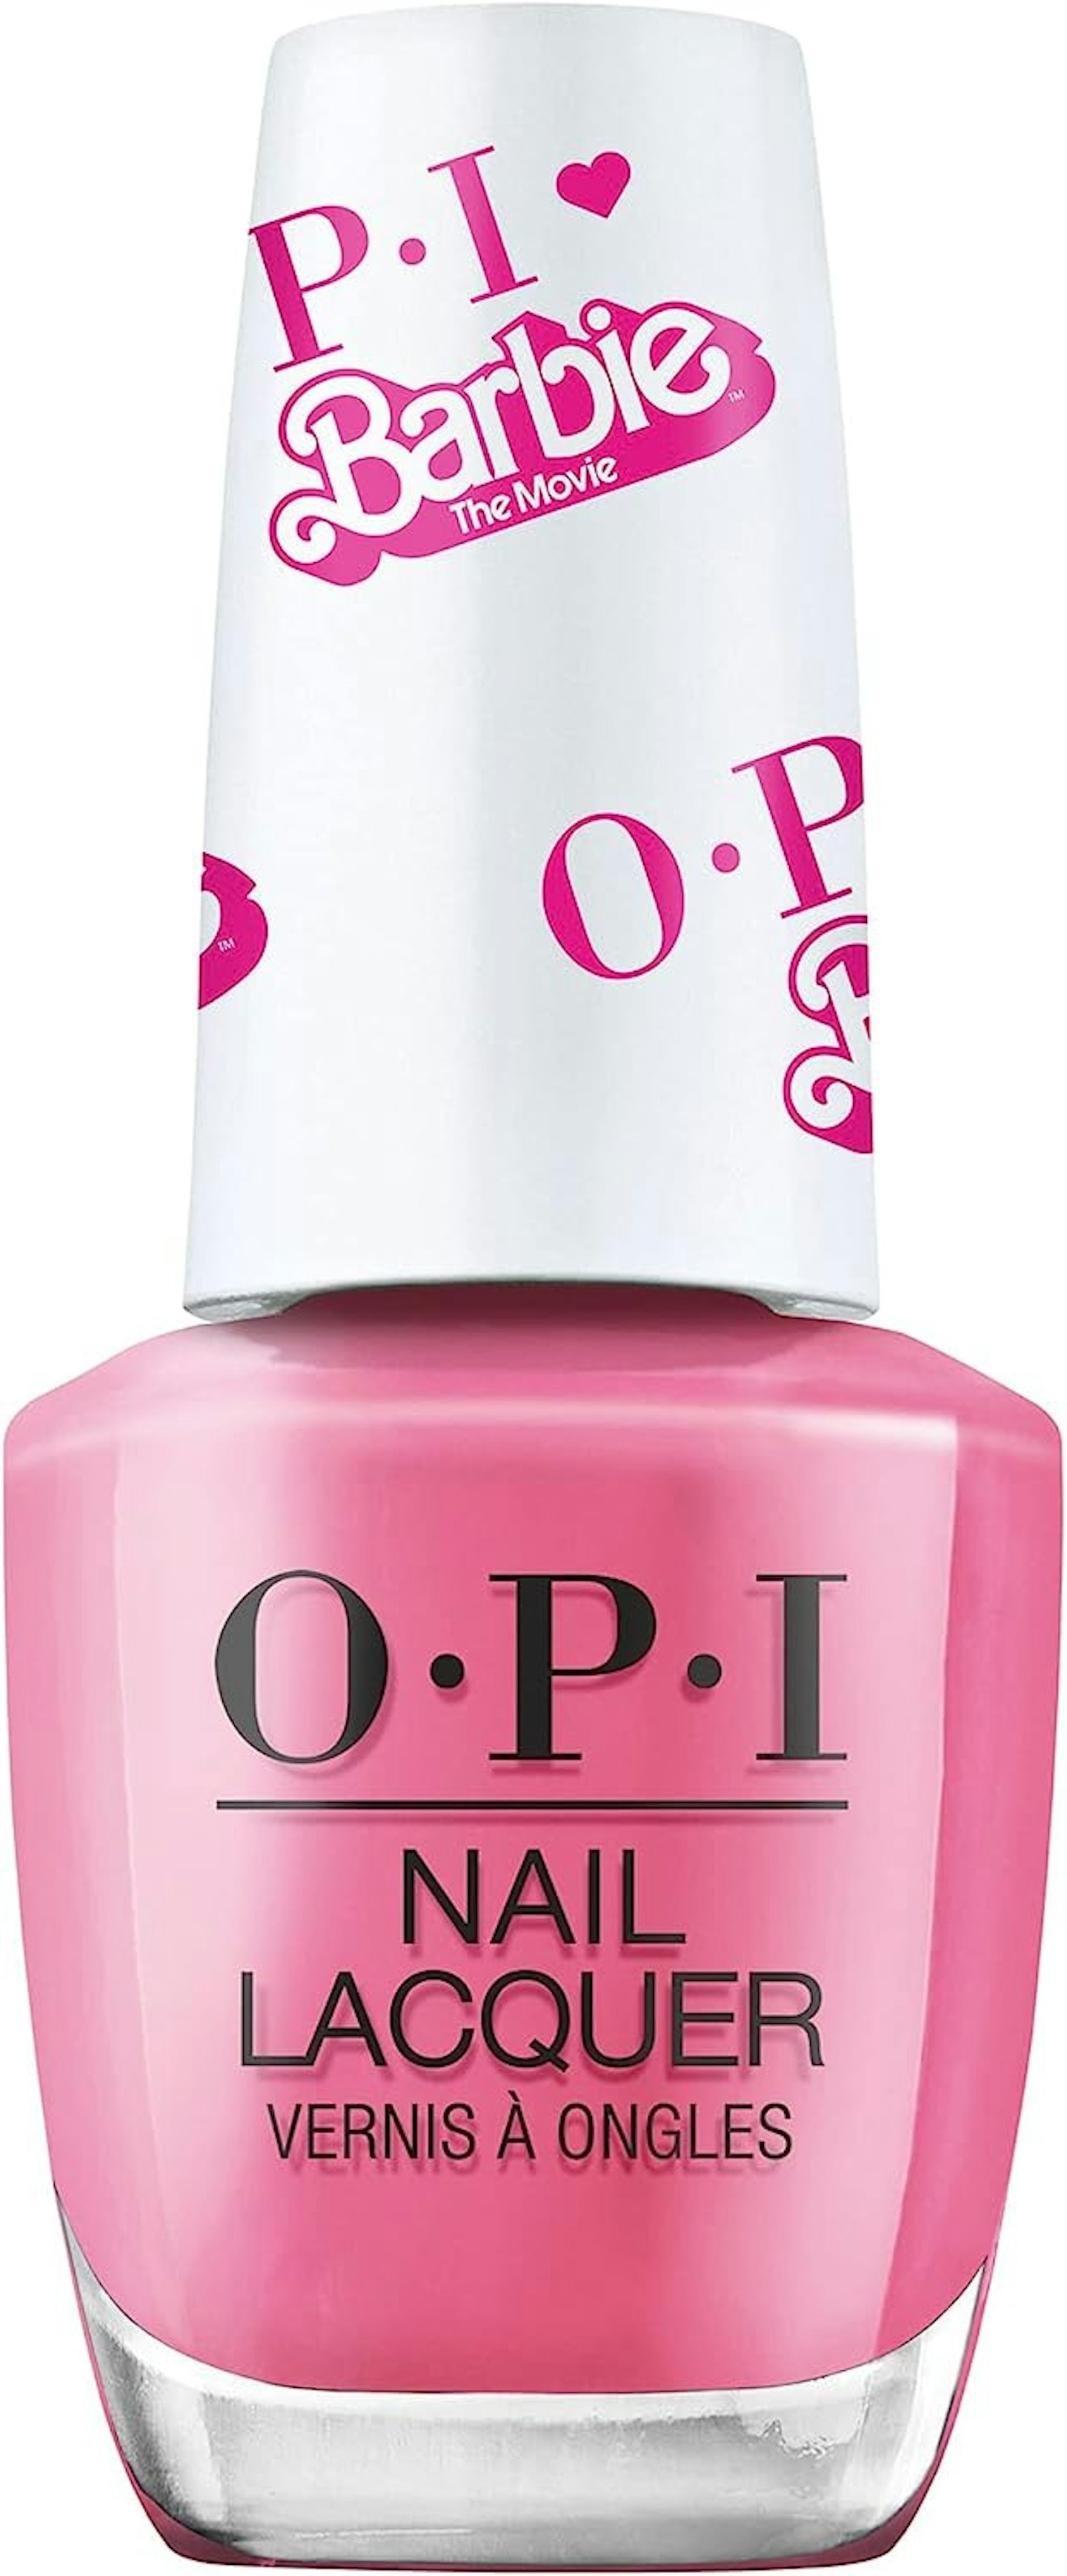 OPI x Barbie Collection in Hi Barbie! pink French manicure